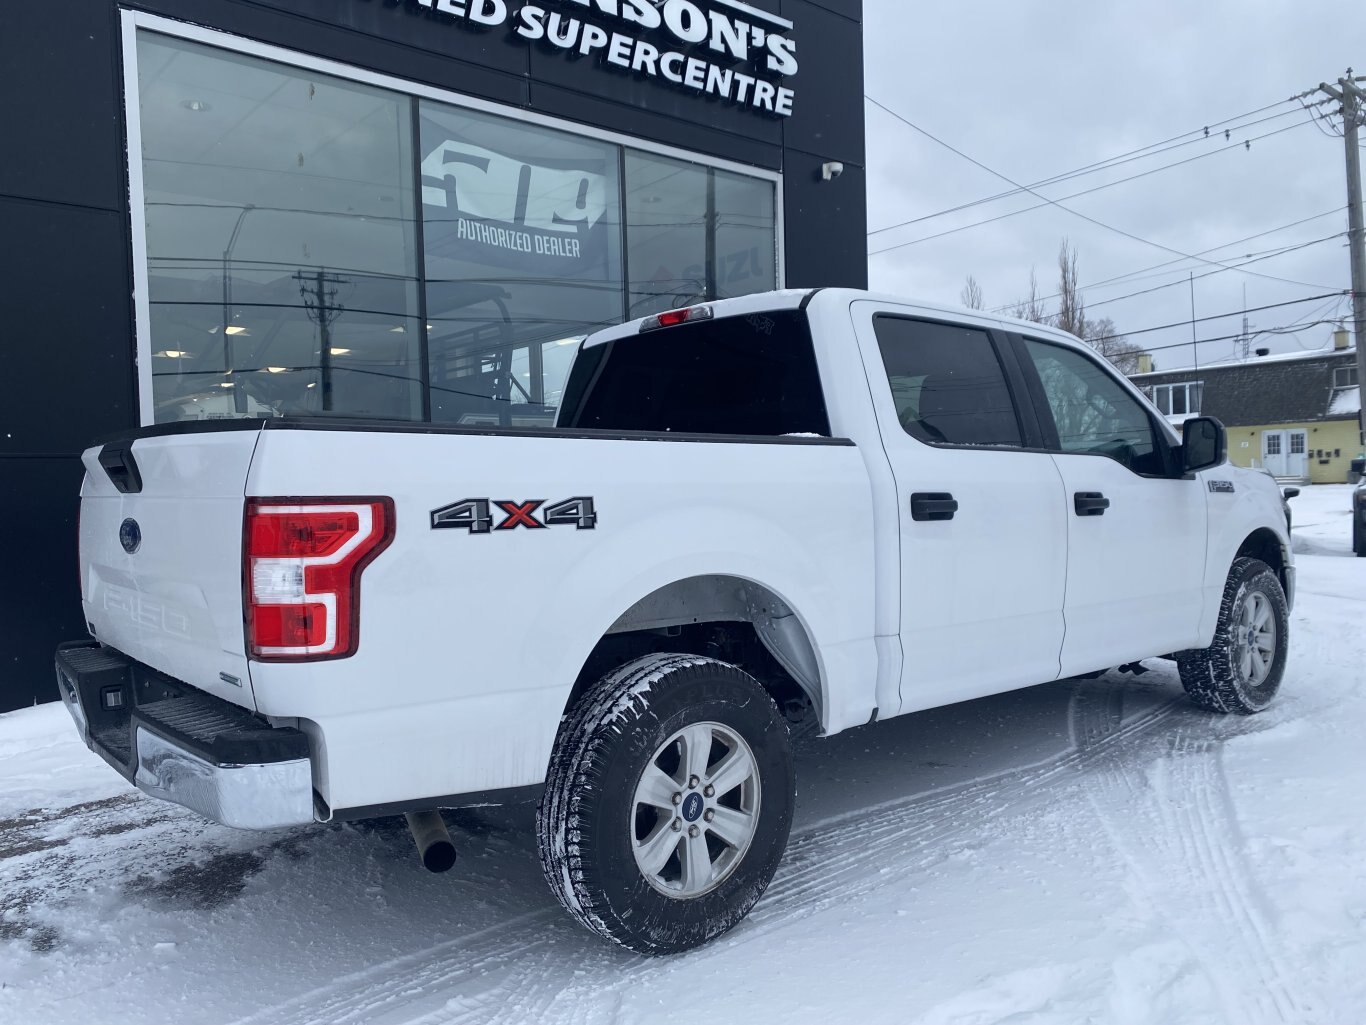 2020 FORD F 150 XLT 4X4 SUPERCREW WITH REAR VIEW CAMERA!! ( PREVIOUS RENTAL )